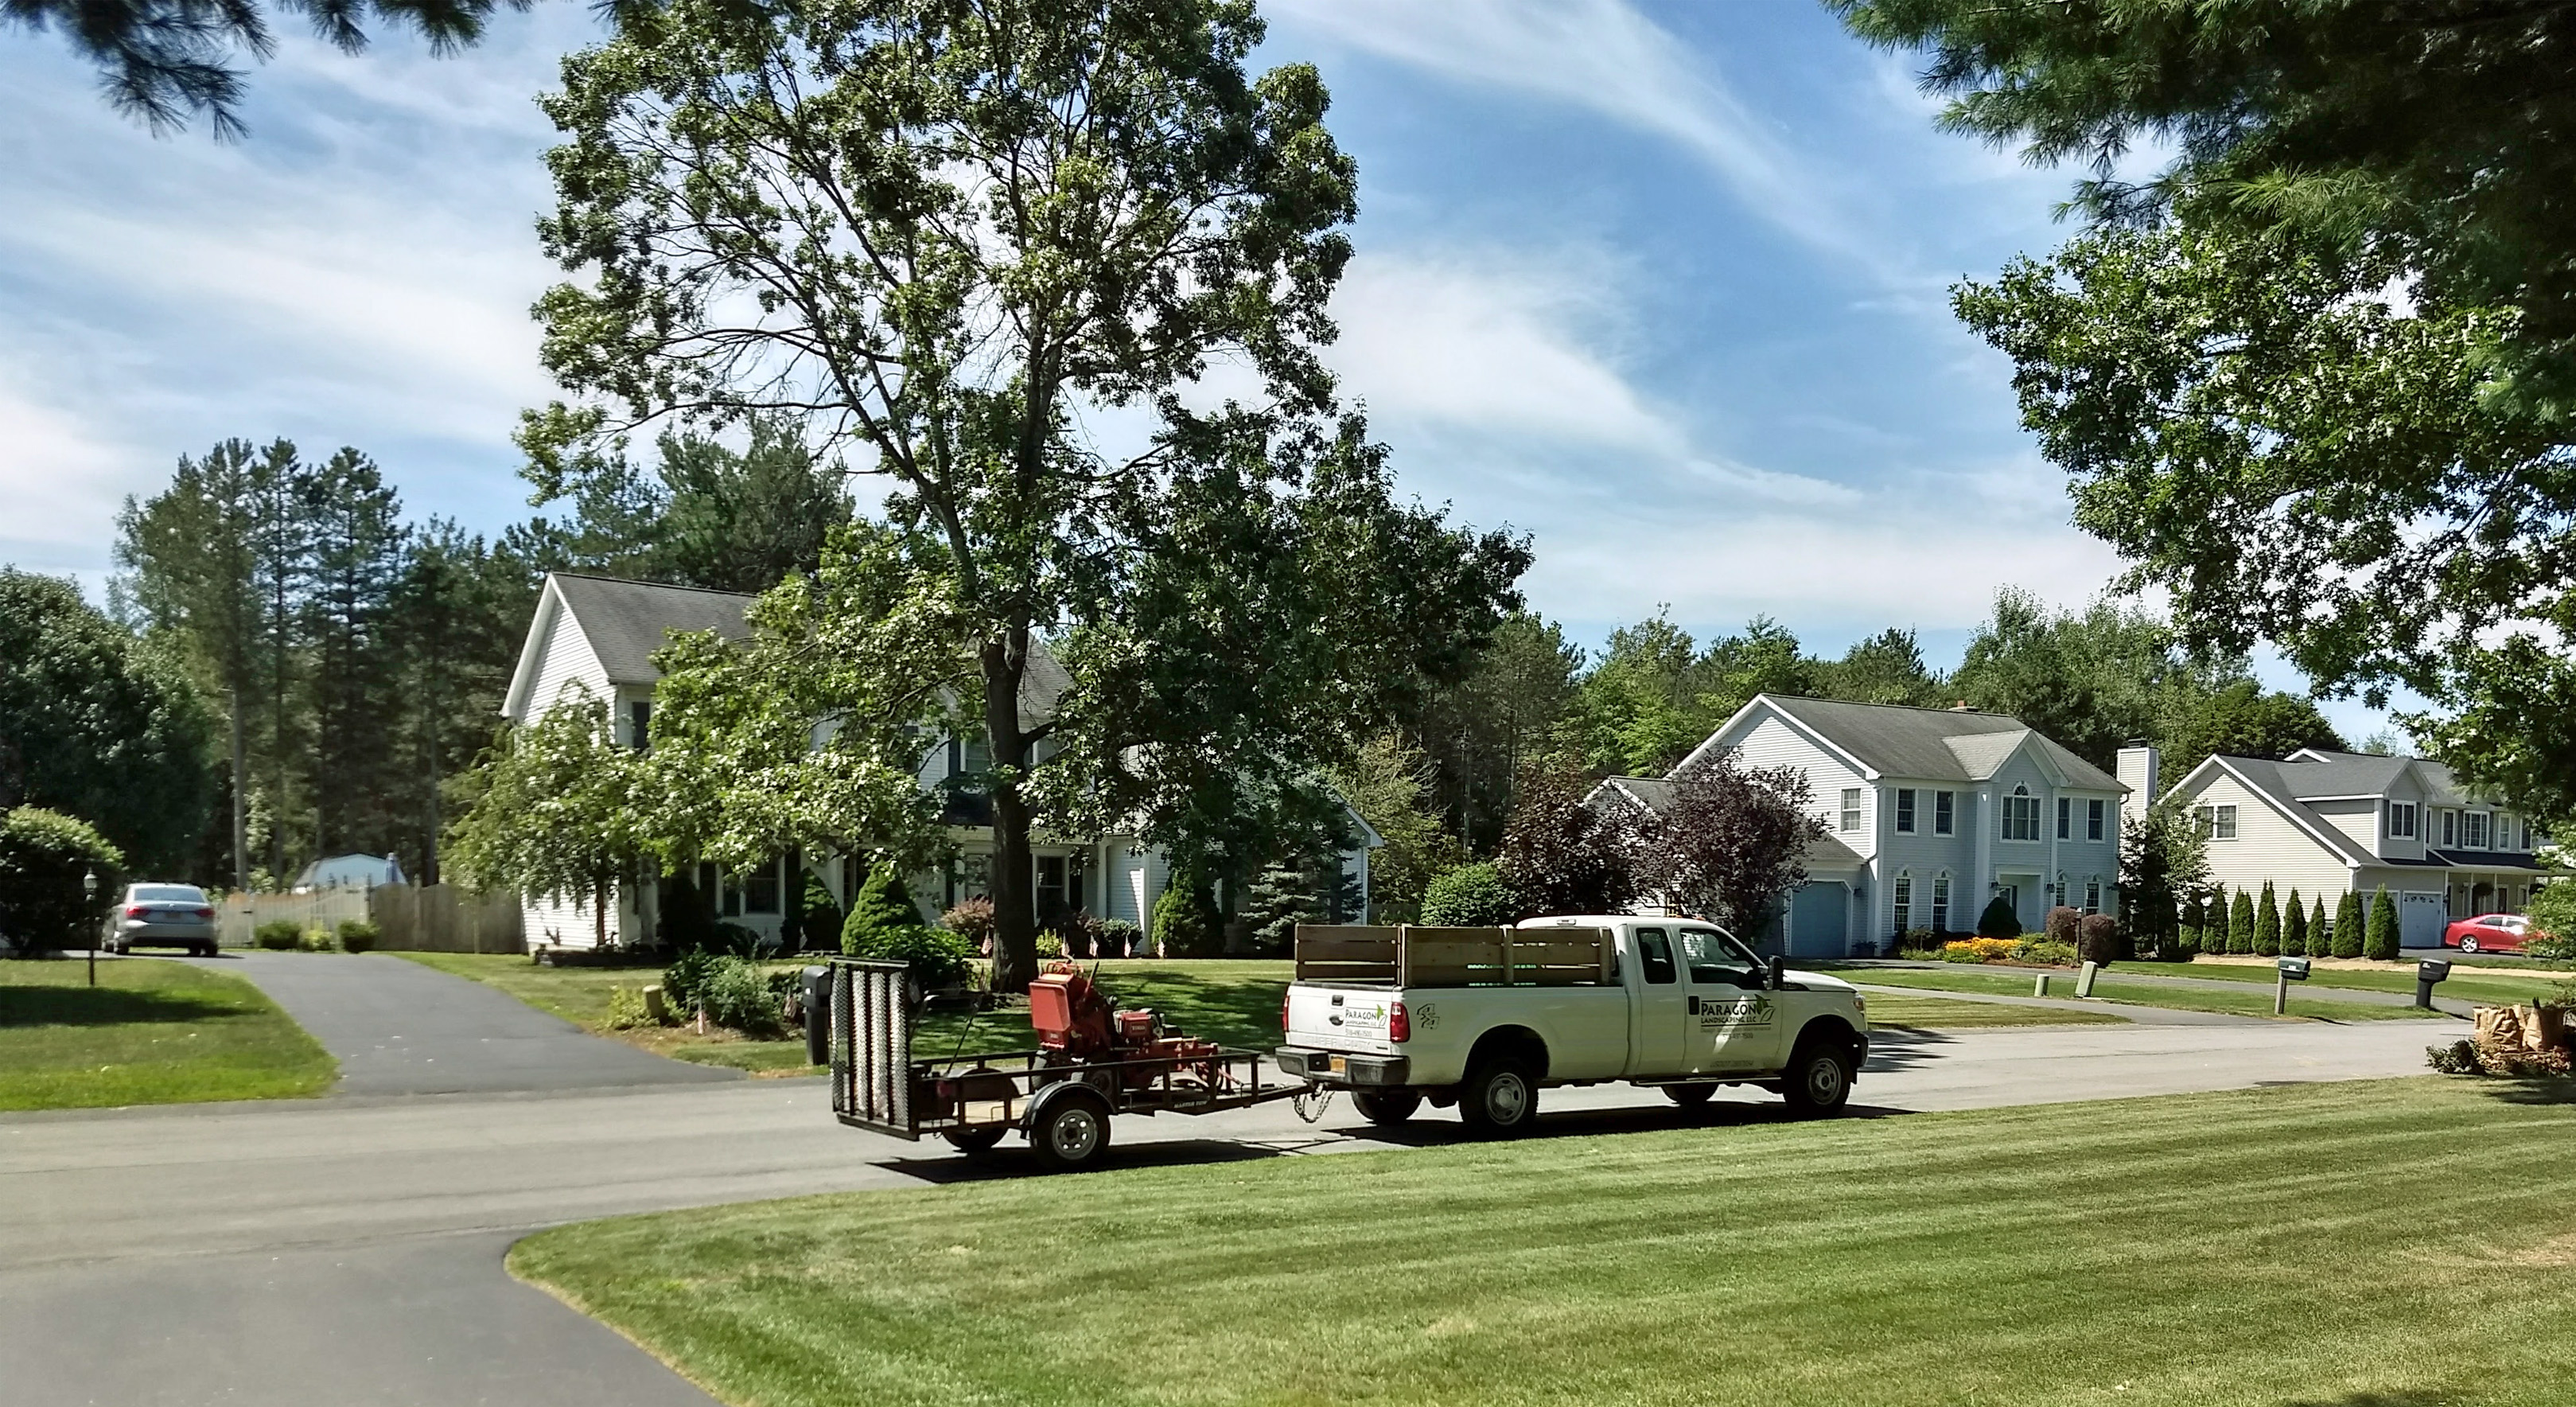 Thumbmnail image of a freshly mowed lawn with work truck and trailer holding a lawn mower